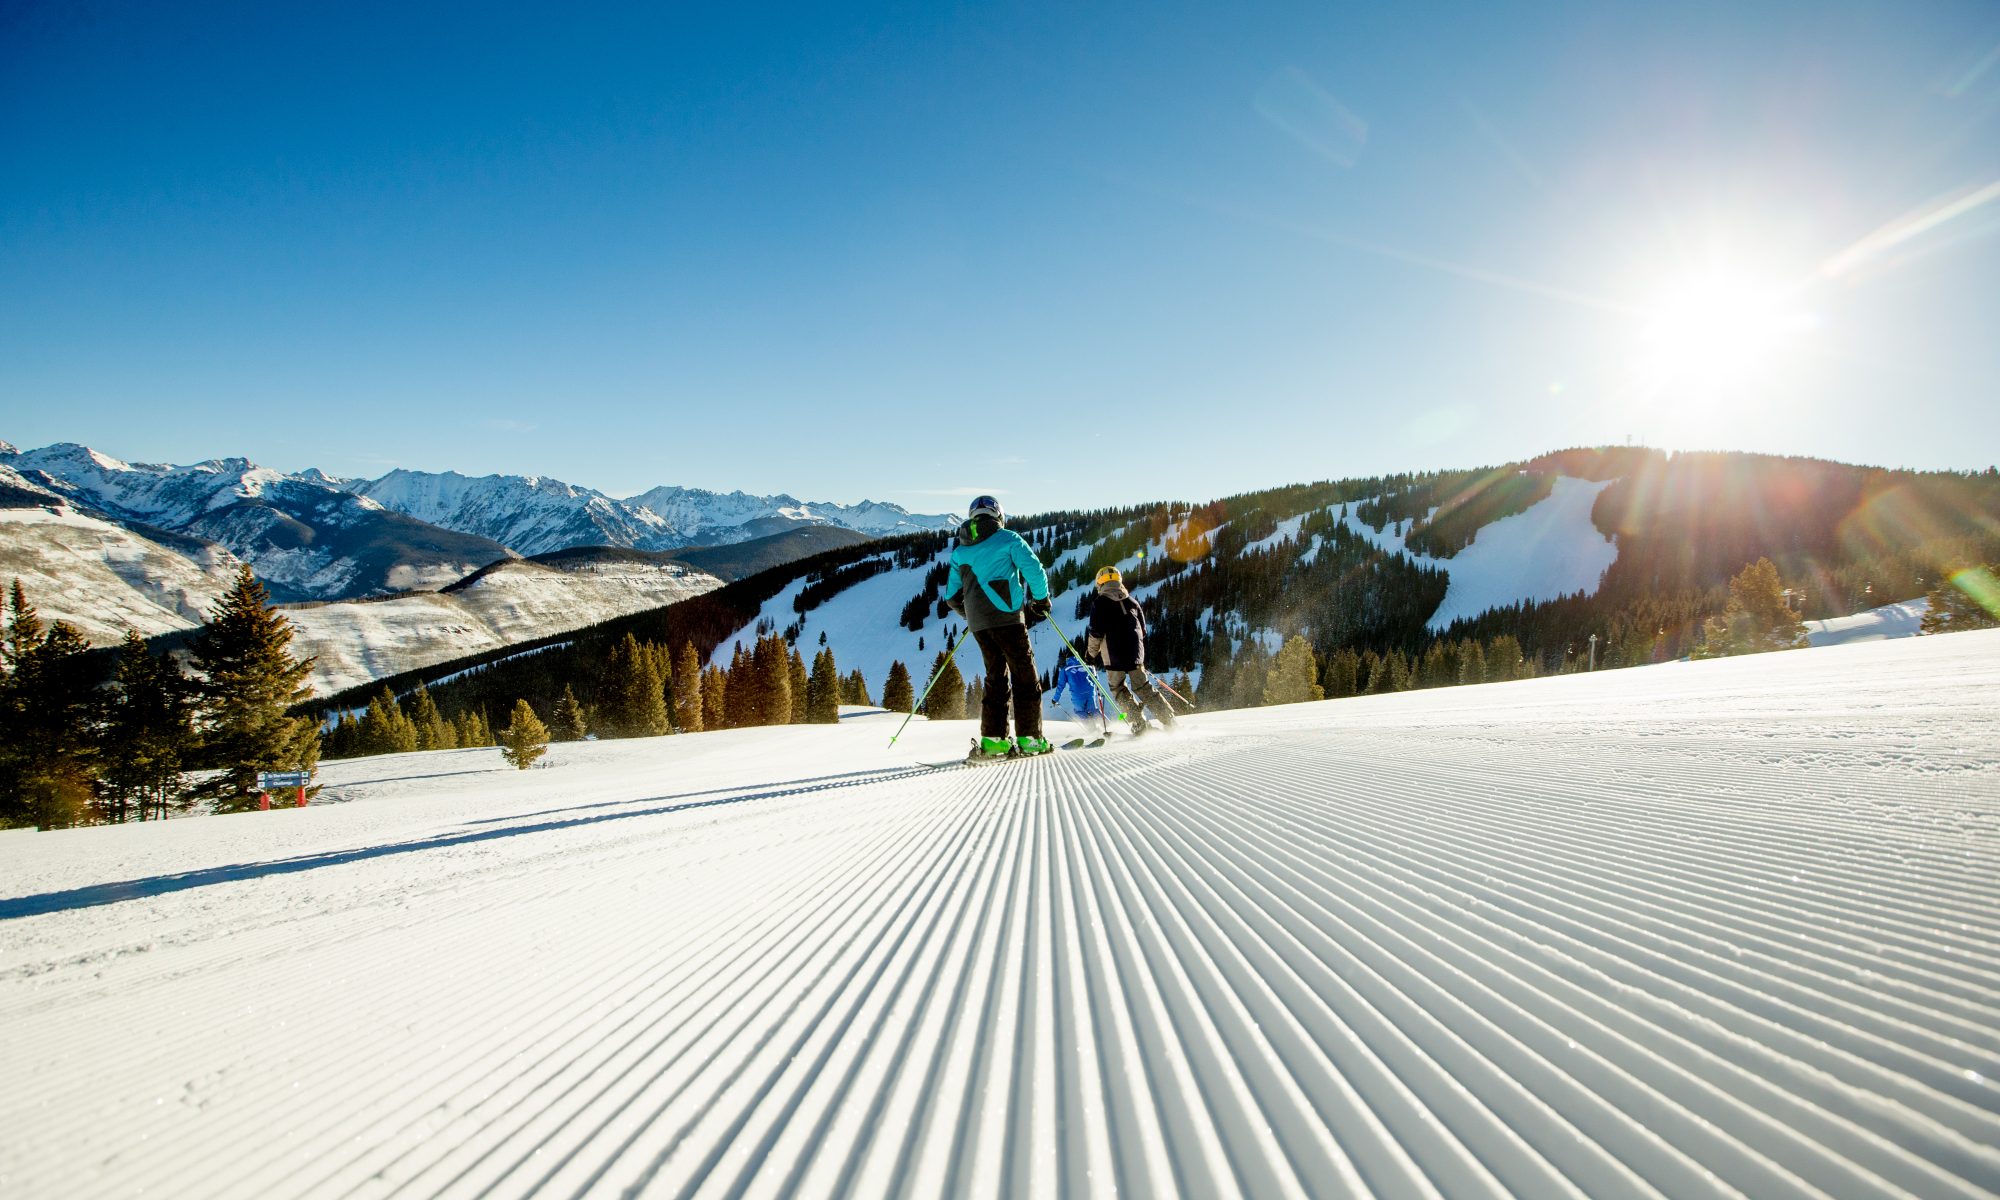 Kids Ski School at Vail, CO. Photo: Daniel Milchev. Vail Resorts. Vail Resorts announces indoor safety protocols for the 2021-22 season.